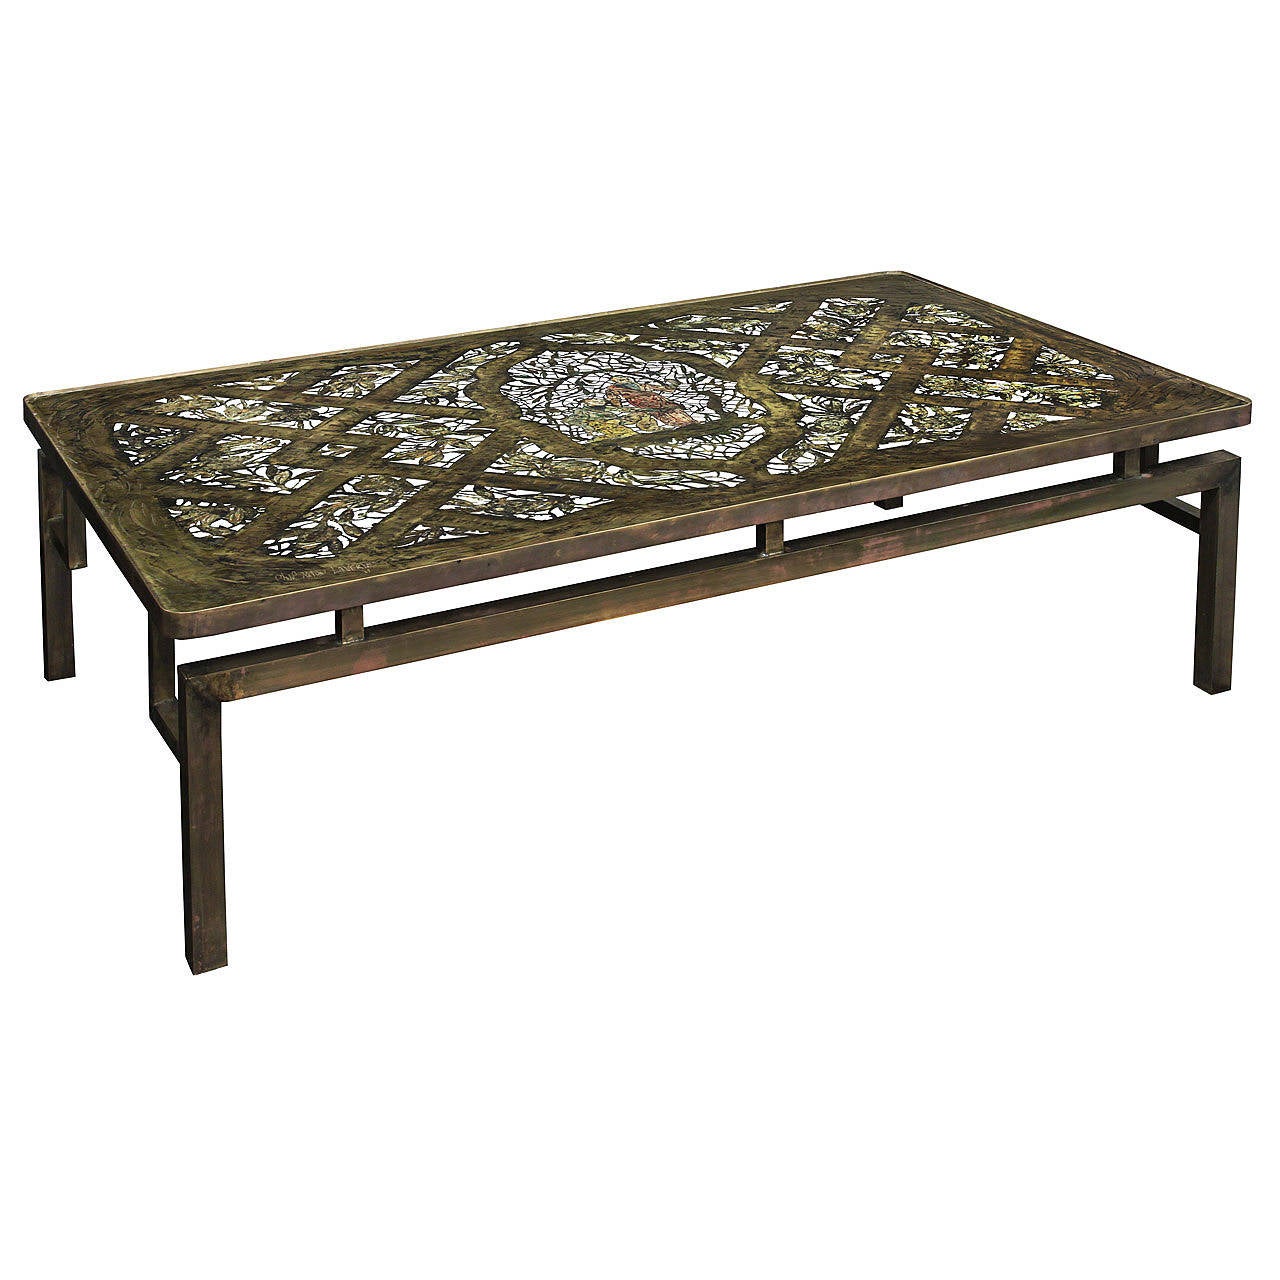 Exceptional and rare coffee table in pewter and bronze, intricately designed with negative space, enamel decoration and glass top, by Philip and Kelvin LaVerne, American, 1960s.
Signed on top “Philip and Kelvin LaVerne 67.”